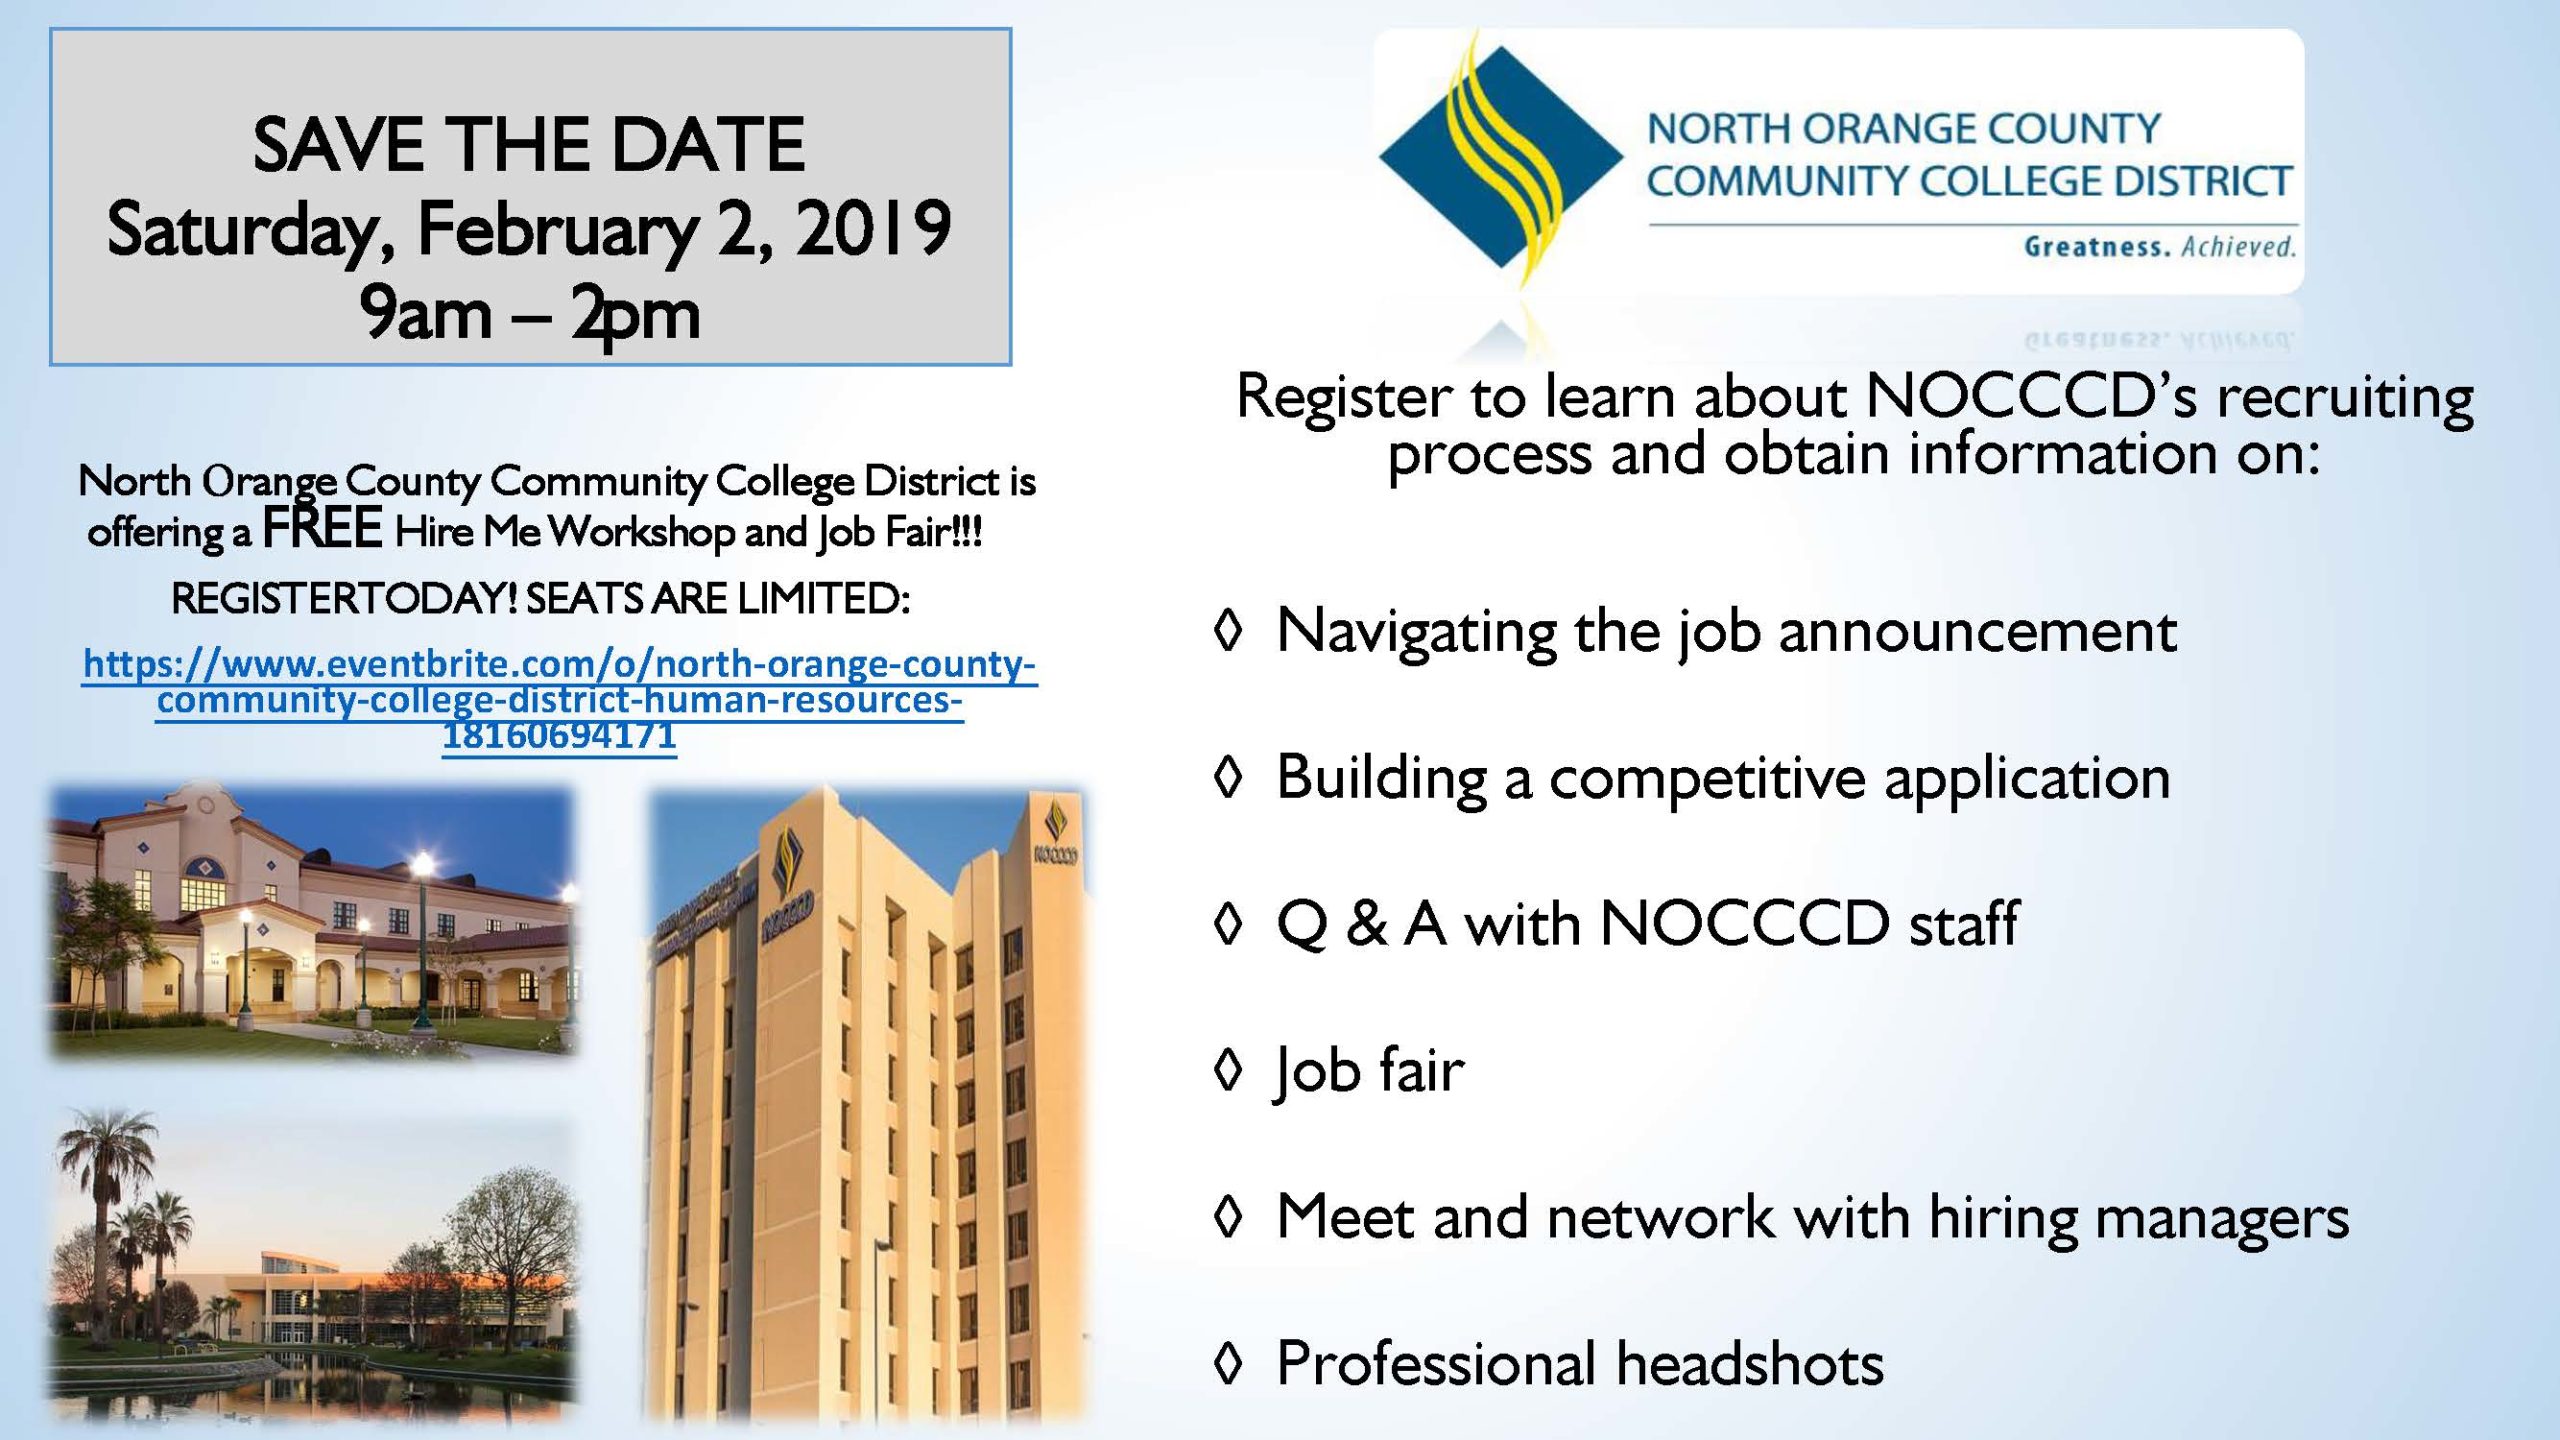 Save the Date NOCCCD Recruiting Information flyer.